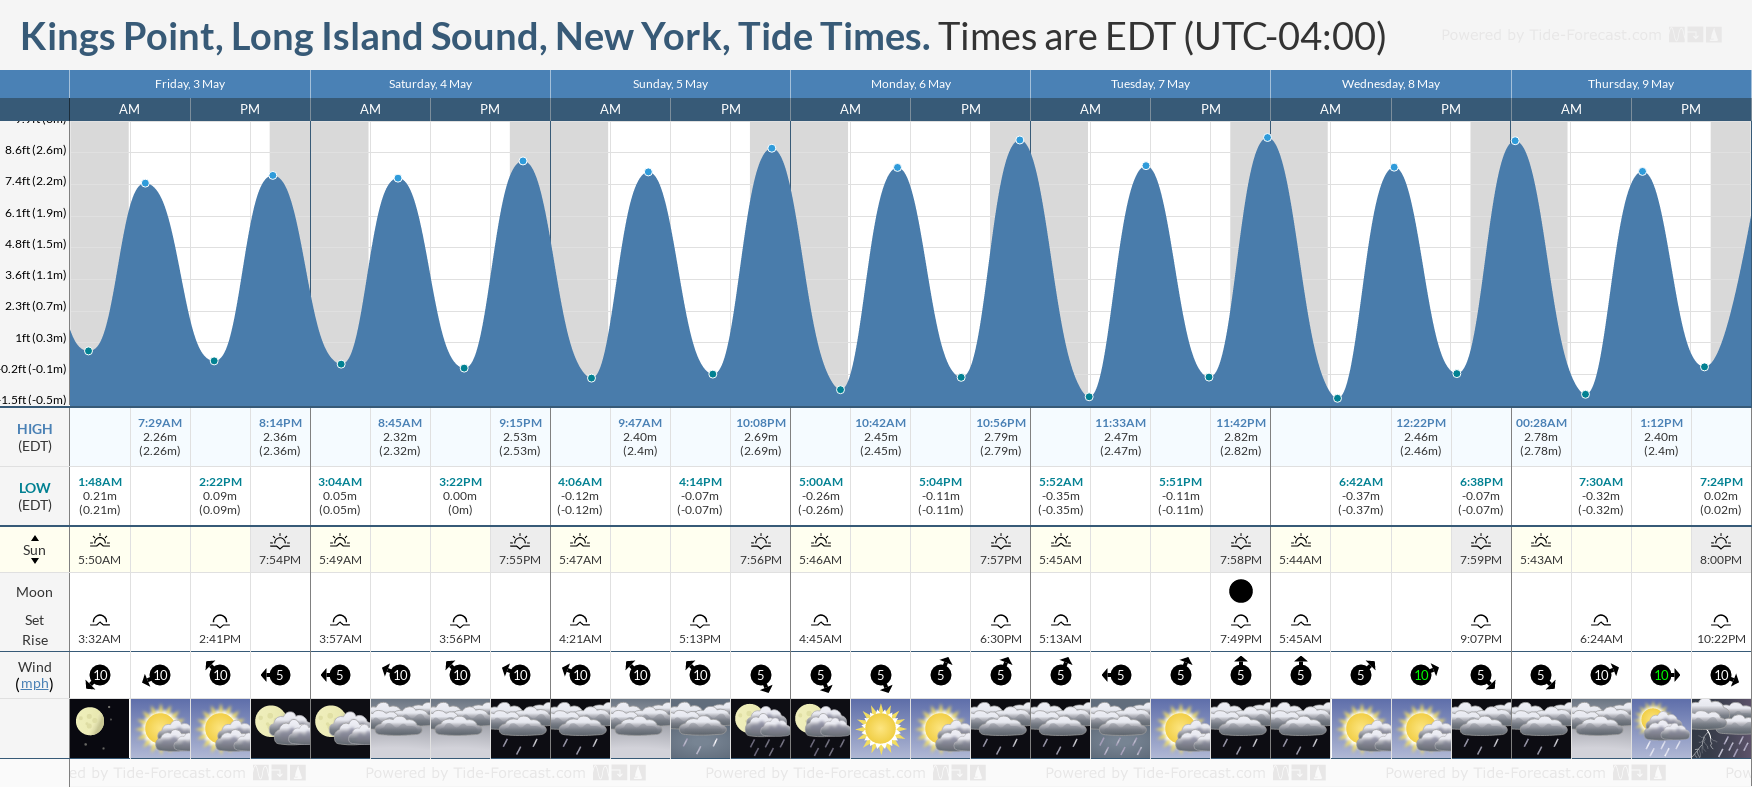 Kings Point, Long Island Sound, New York Tide Chart including high and low tide tide times for the next 7 days